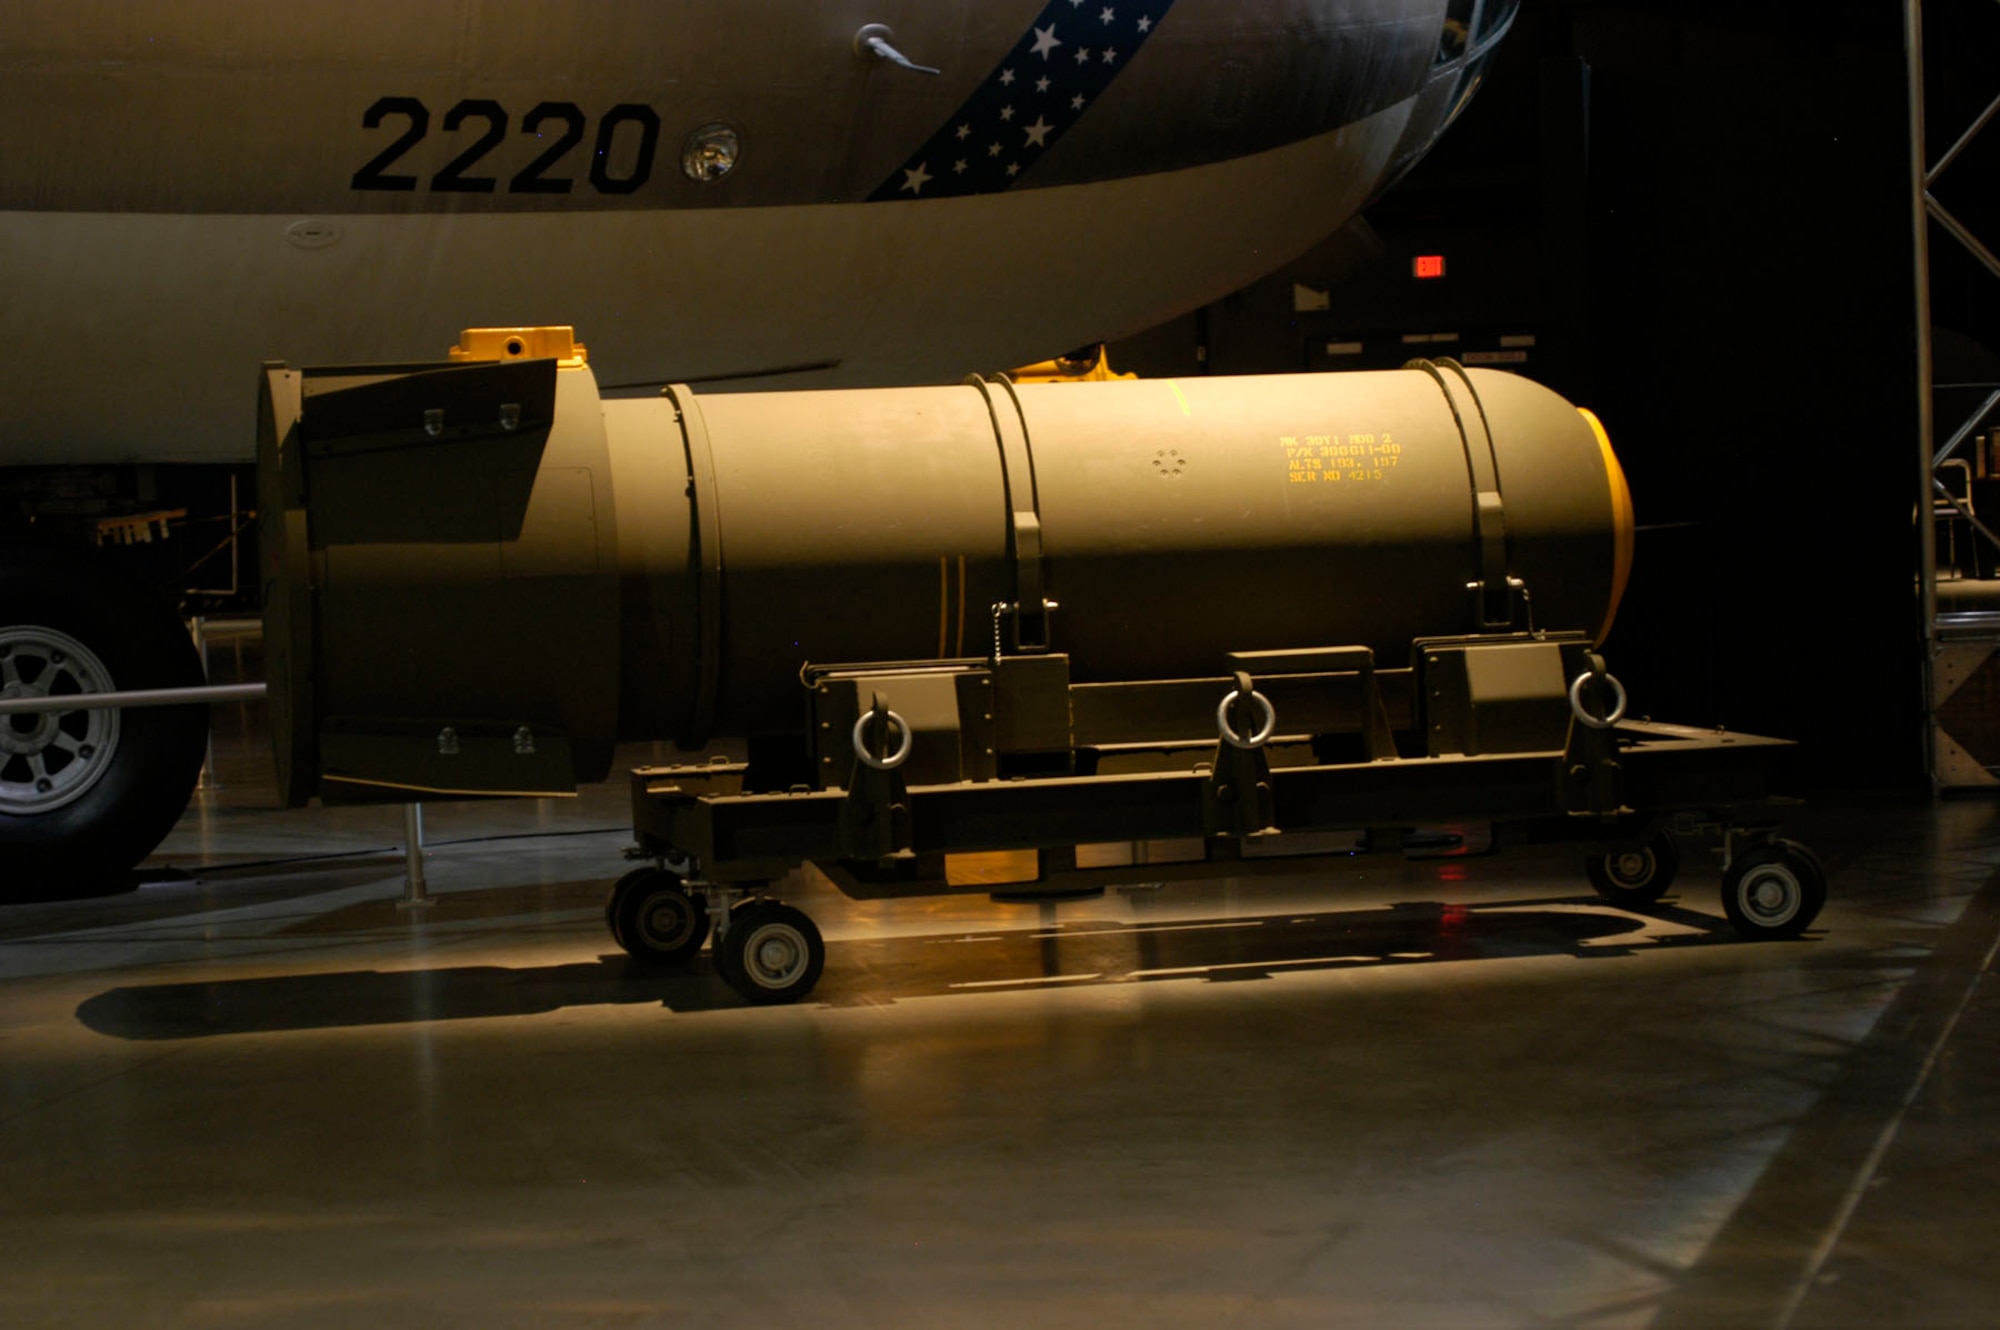 DAYTON, Ohio - The MK39 nuclear bomb on display in the Cold War Gallery at the National Museum of the U.S. Air Force. (U.S. Air Force photo)